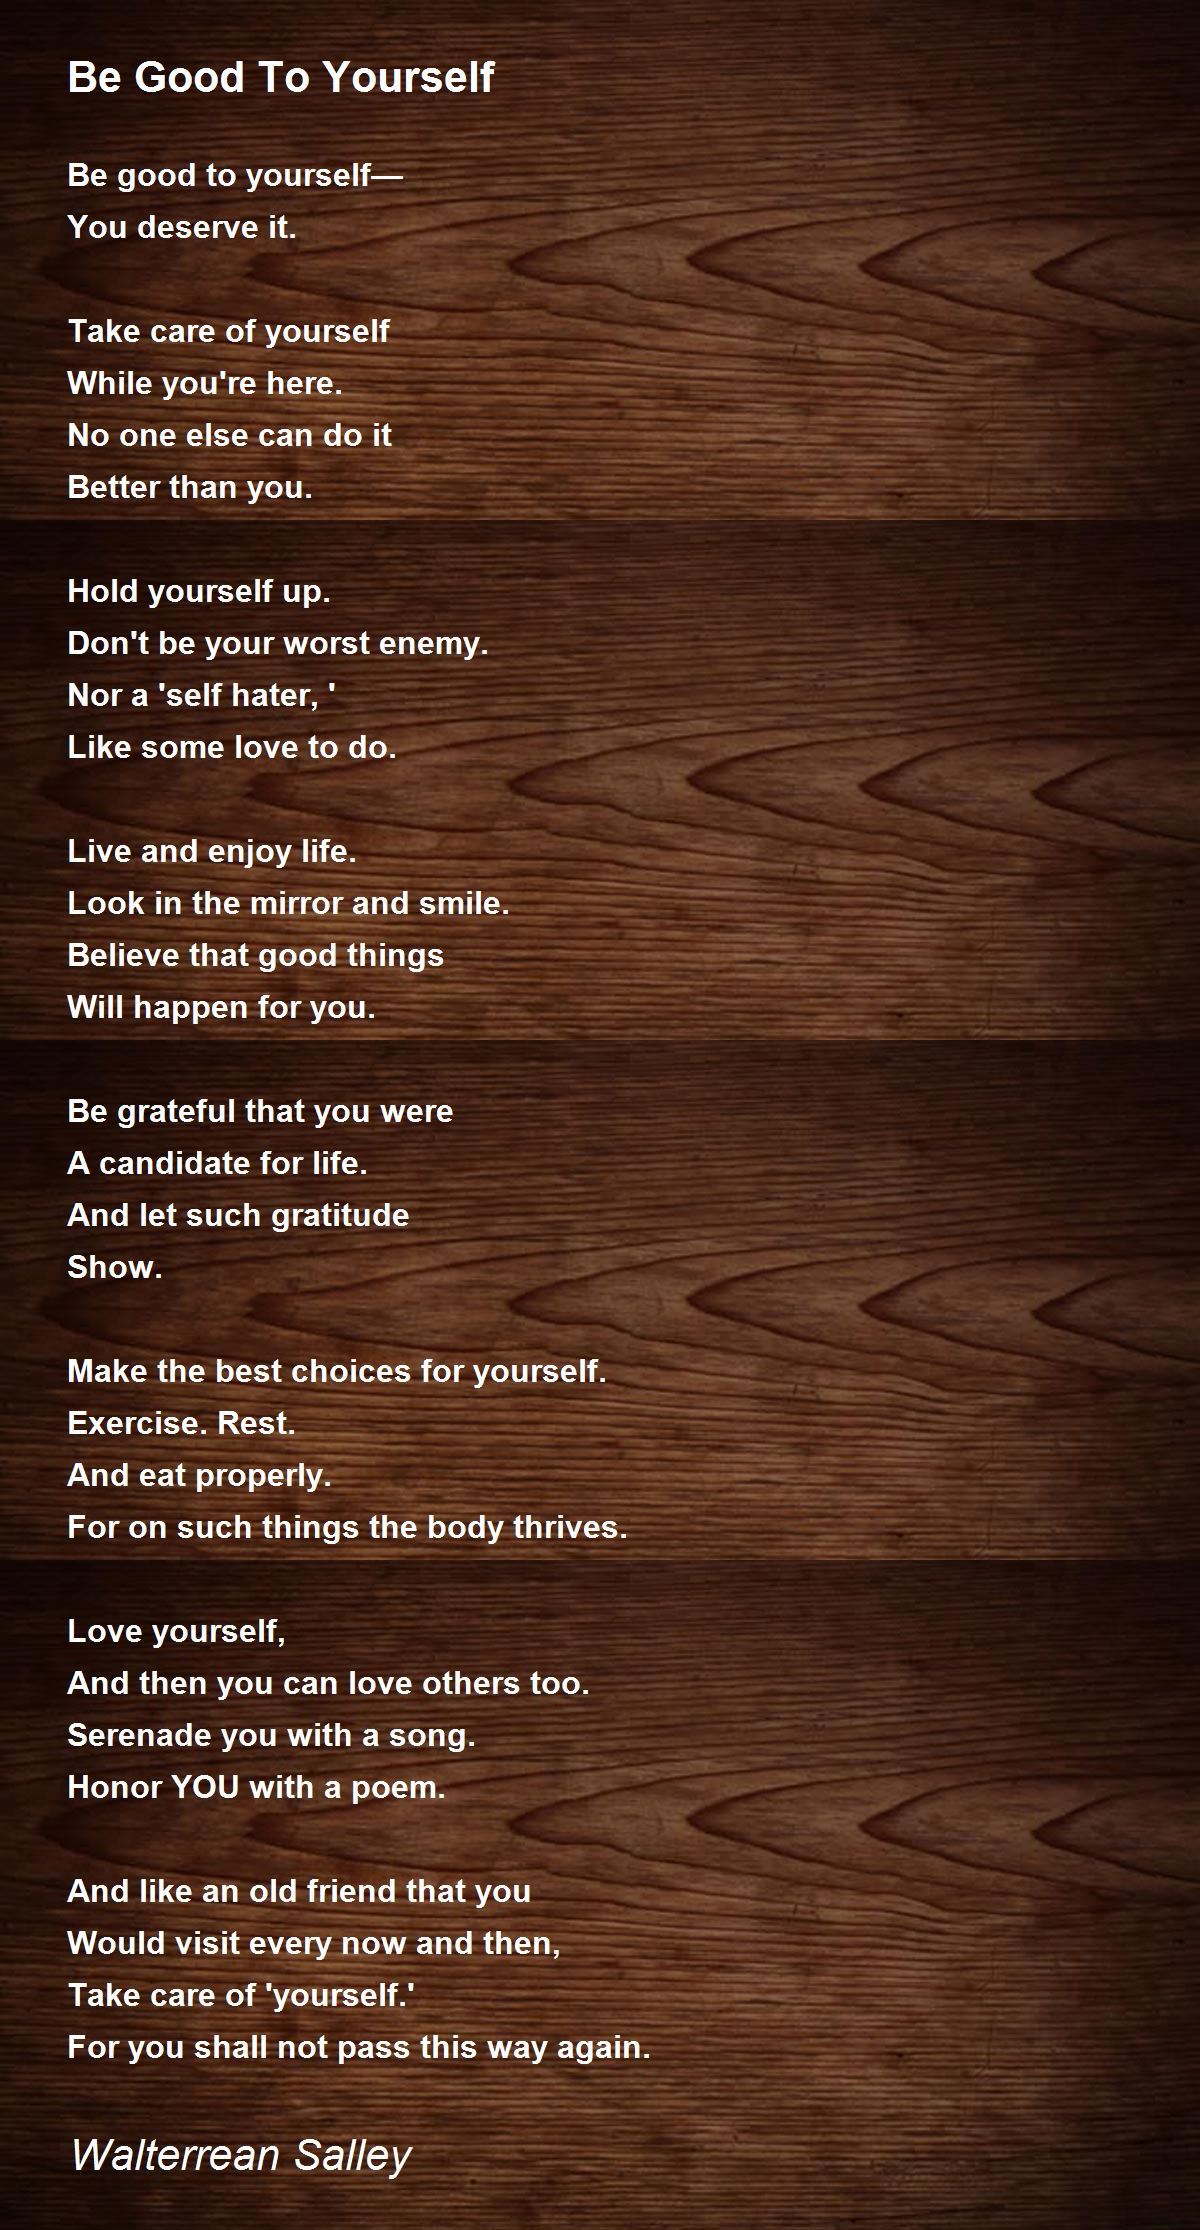 Be Good To Yourself by Walterrean Salley - Be Good To Yourself Poem